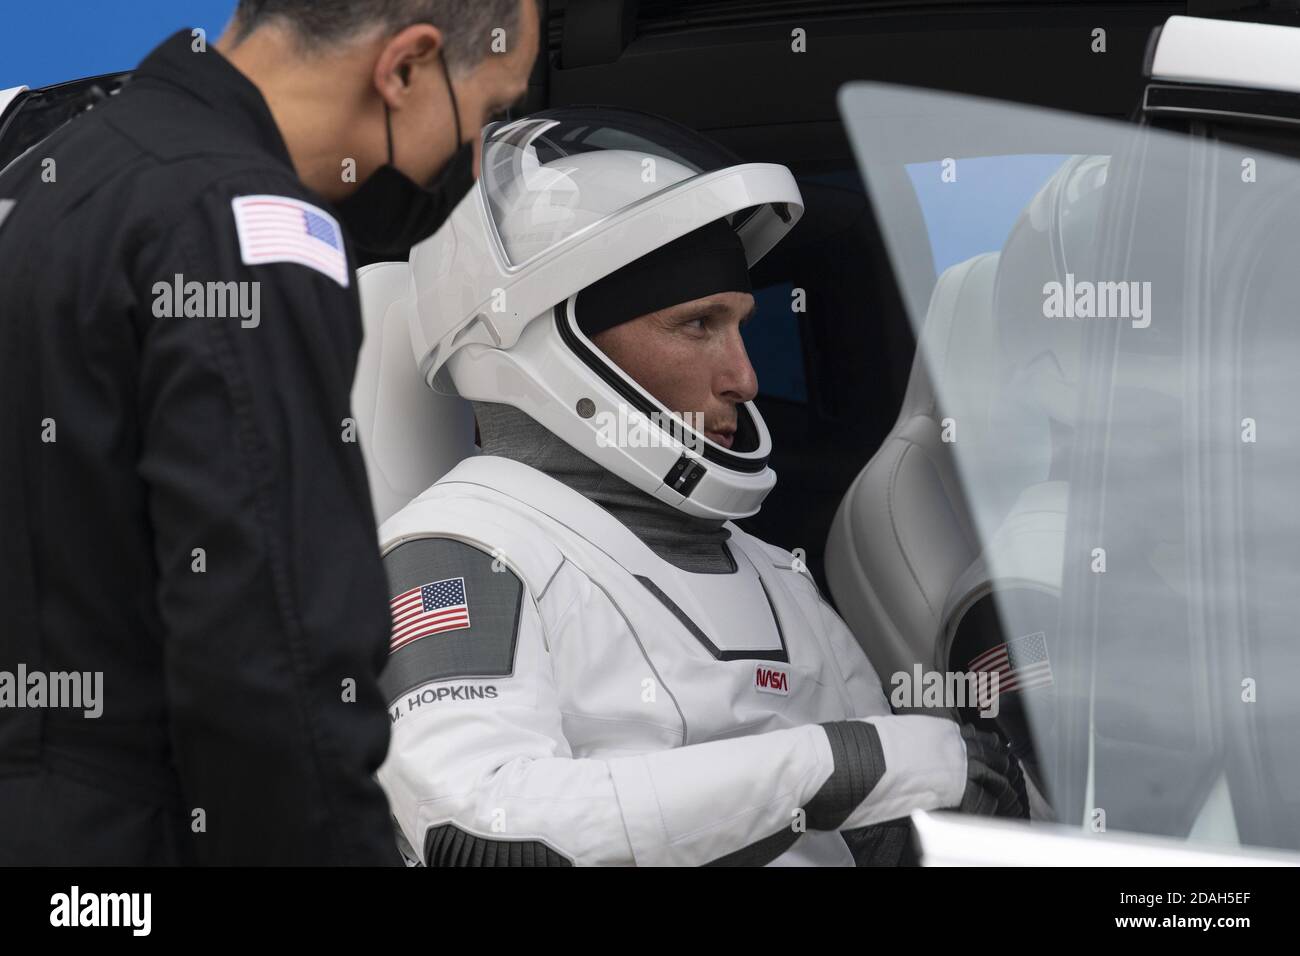 Kennedy Space Center, Florida, USA. 12th Nov 2020. NASA astronauts Mike Hopkins, Victor Glover, Shannon Walker, and Japan Aerospace Exploration Agency (JAXA) astronaut Soichi Noguchi, wearing SpaceX spacesuits, are seen as they prepare to depart the Neil A. Armstrong Operations and Checkout Building for Launch Complex 39A during a dress rehearsal prior to the Crew-1 mission launch, on November 12, 2020, at NASA's Kennedy Space Center in Florida. Credit: UPI/Alamy Live News Stock Photo